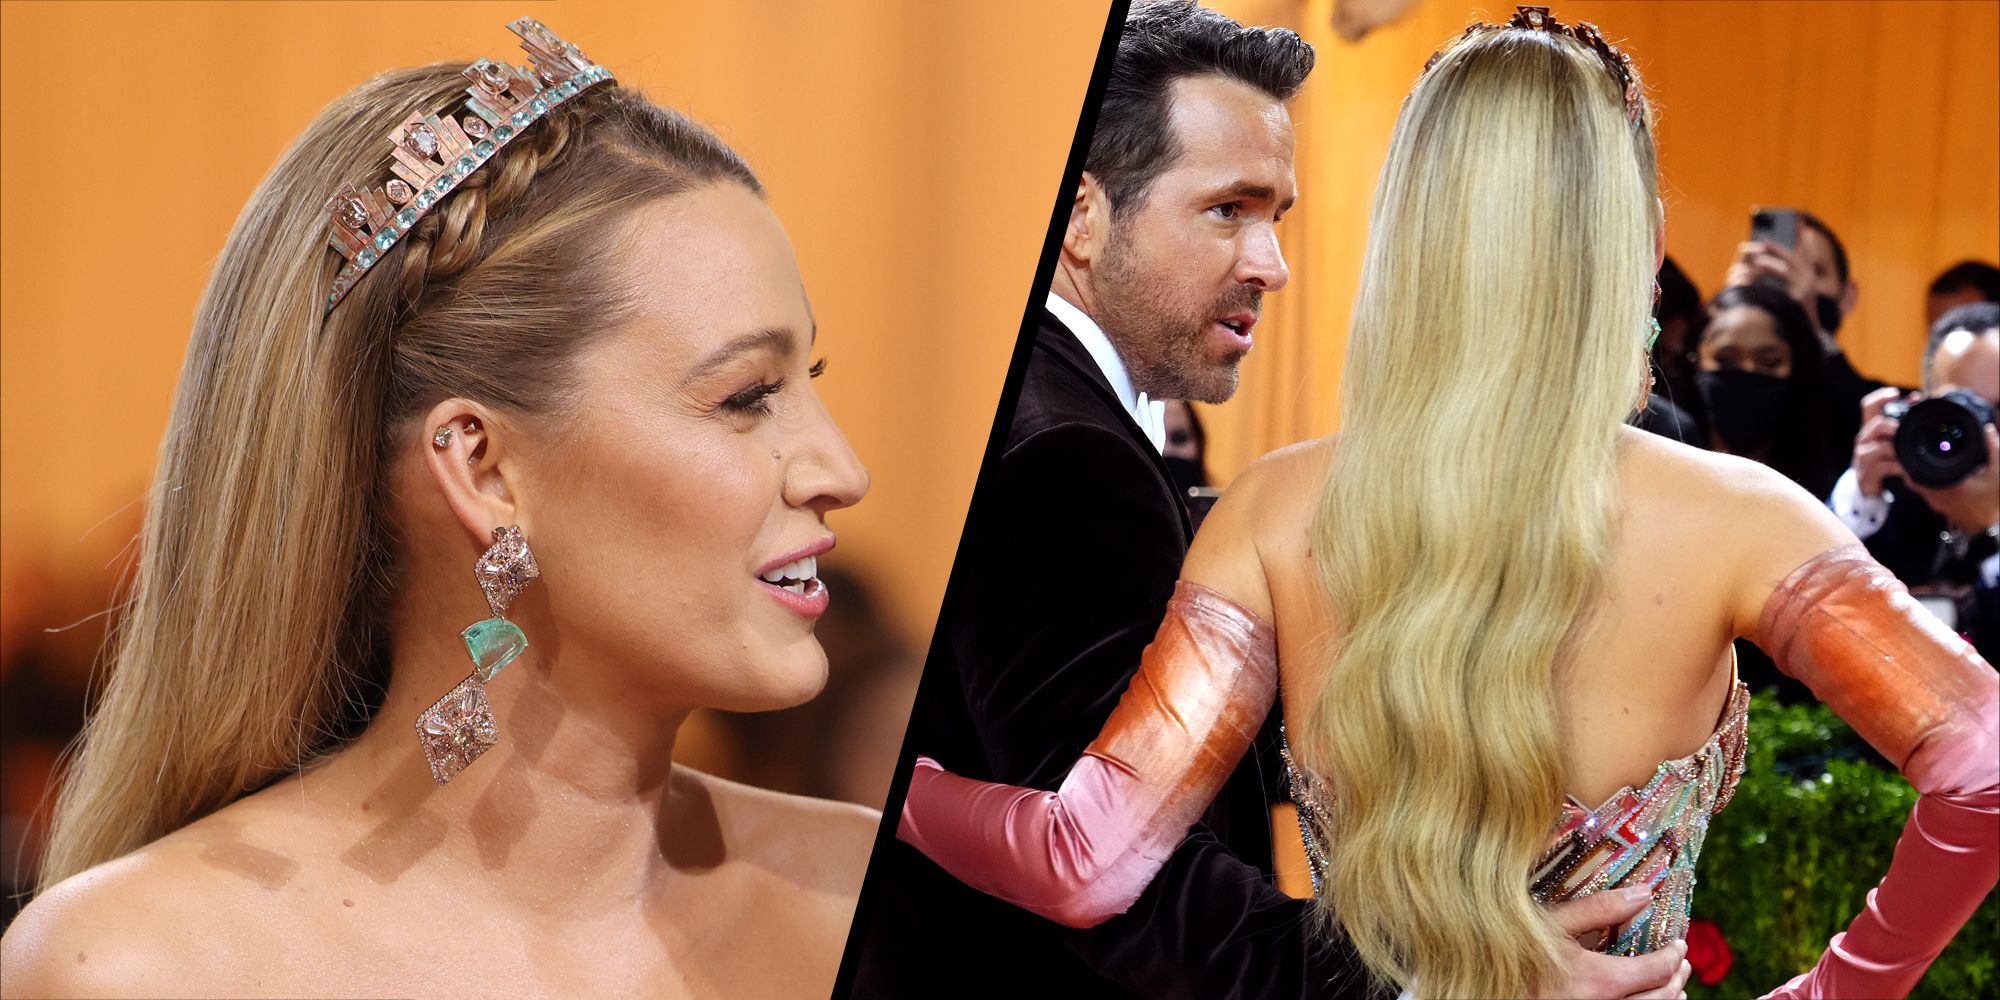 Blake Lively's regal hairstyle at the 2022 Met Gala